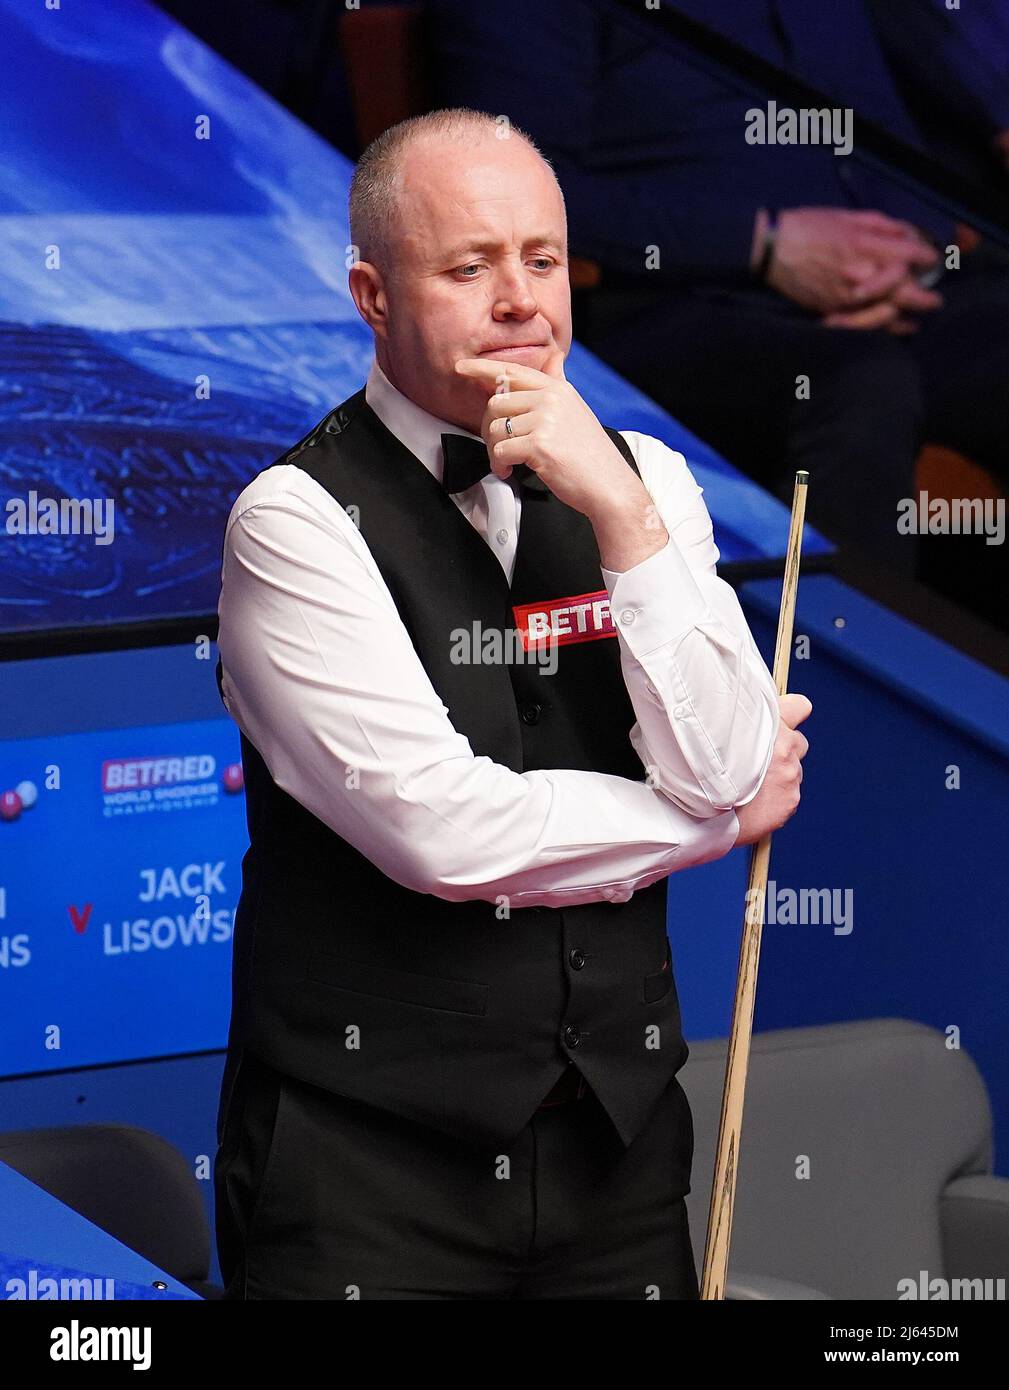 John Higgins in action during the final session of his quarter-final match against Jack Lisowski, during day twelve of the Betfred World Snooker Championship at The Crucible, Sheffield